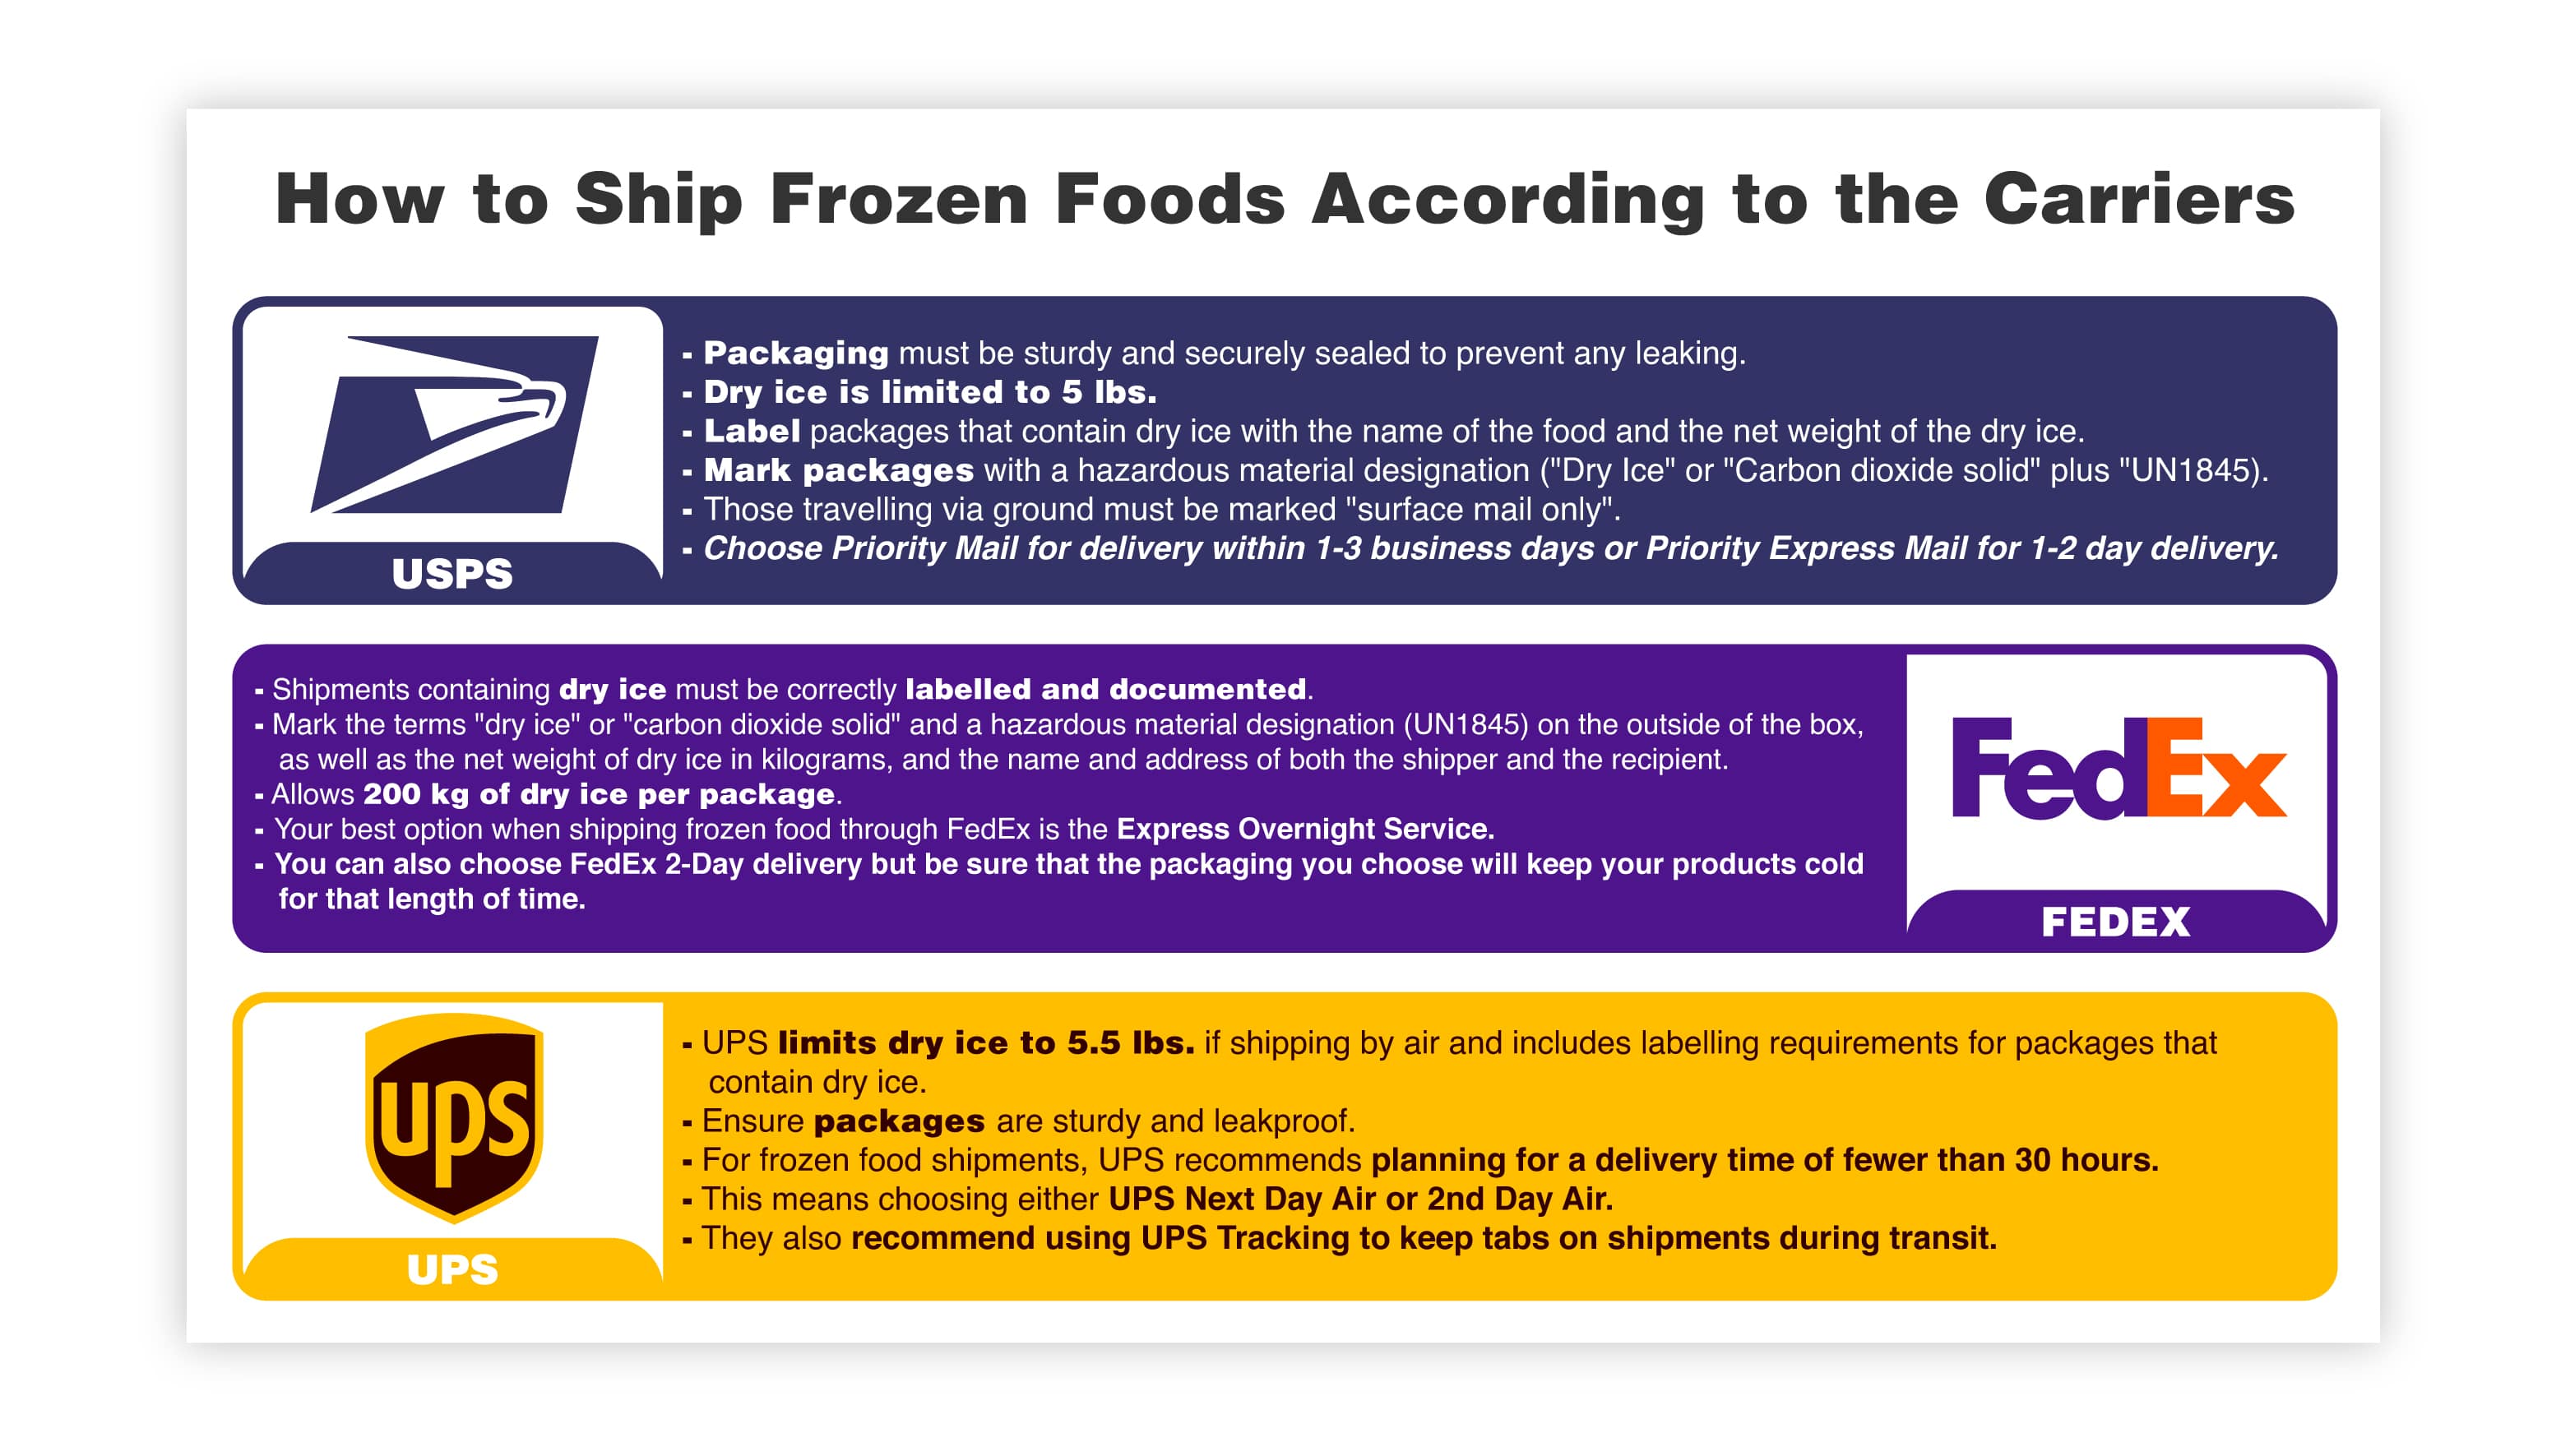 How to Ship Frozen Foods According to the Carriers